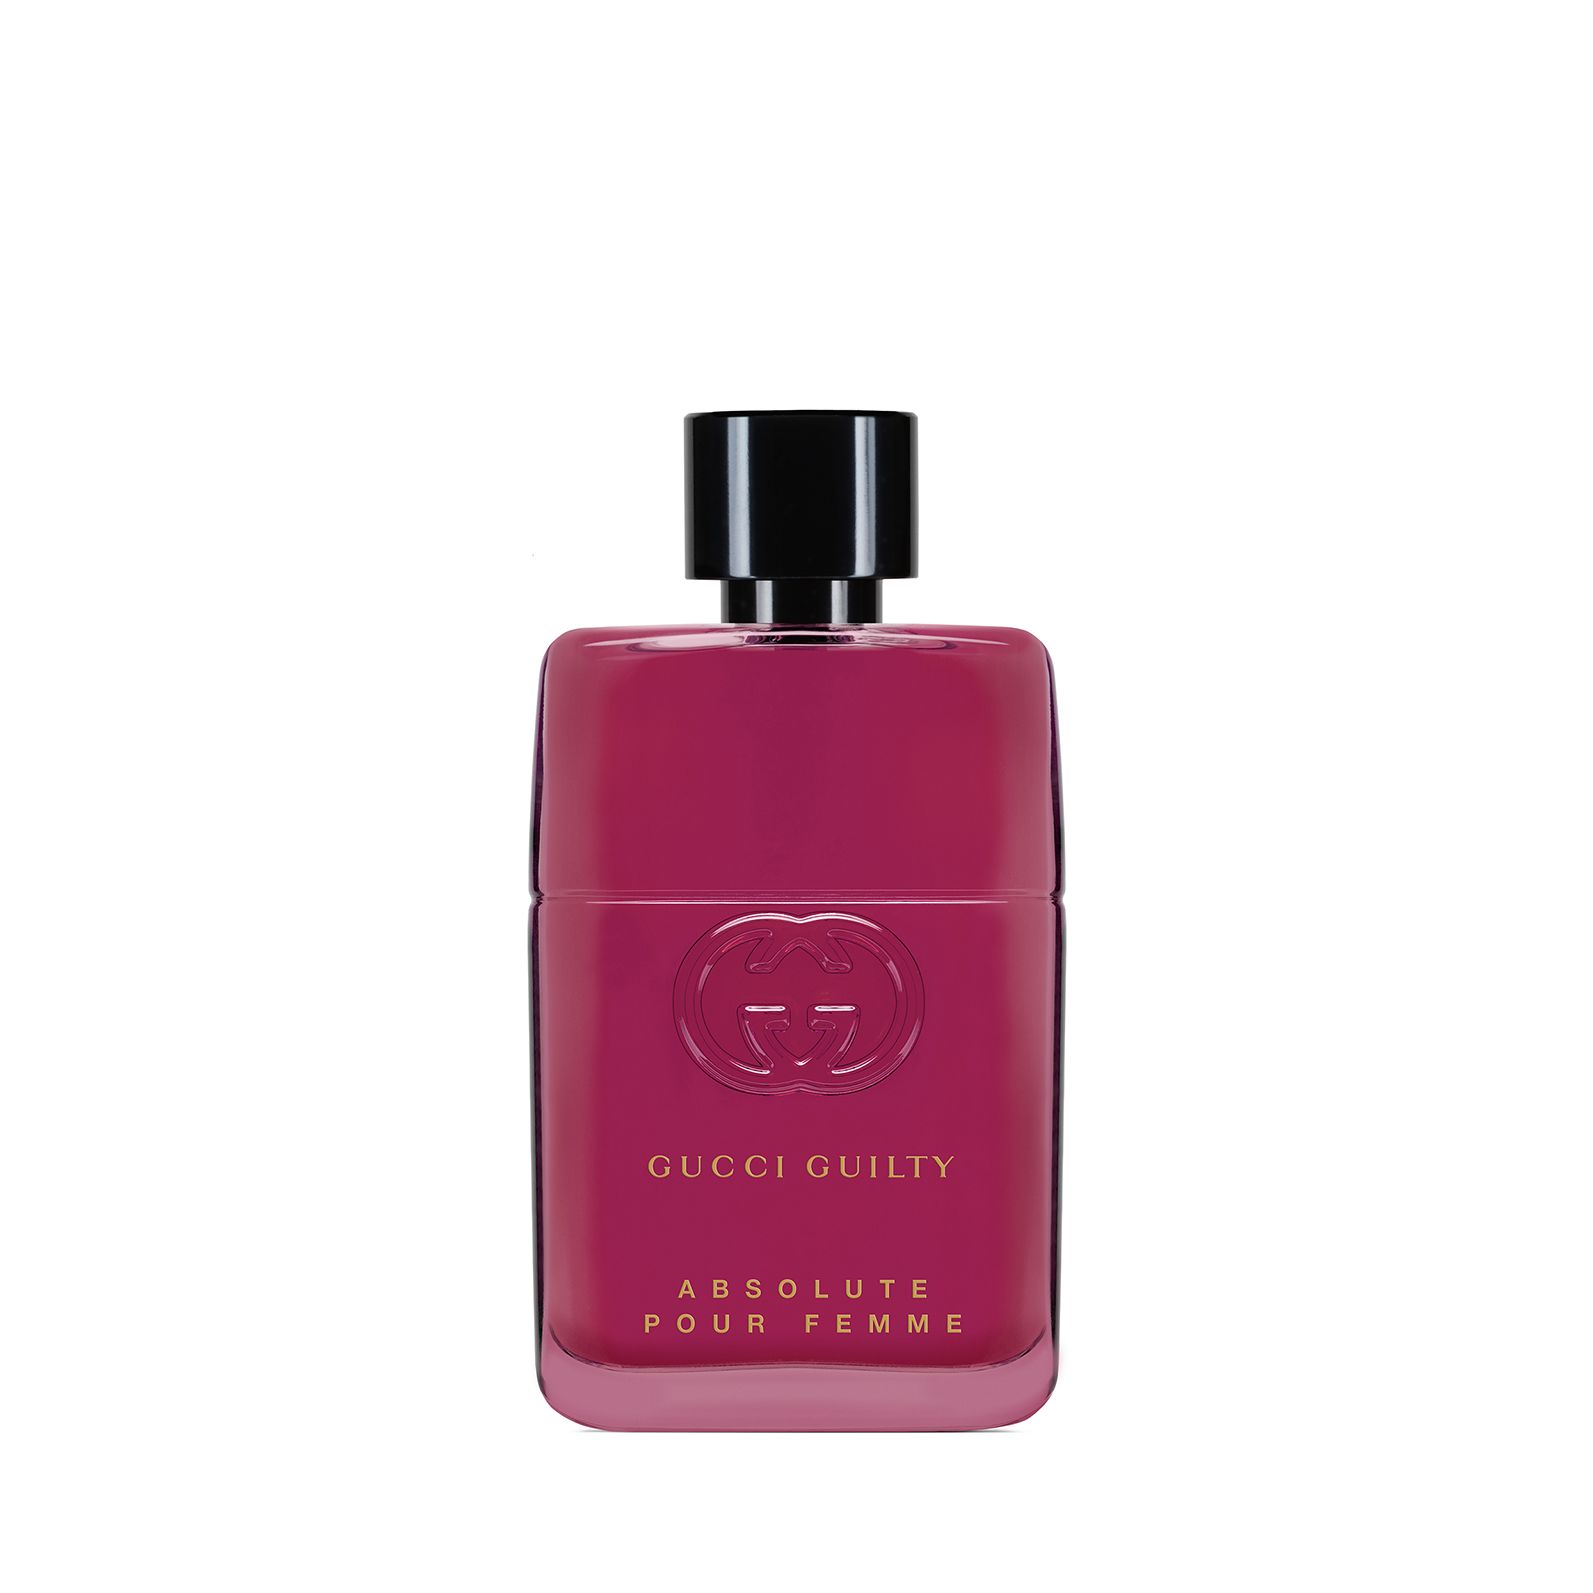 Парфюмерная вода GUCCI Guilty Absolute Pour Femme женская, 50 мл gucci guilty love edition mmxxi pour femme 90